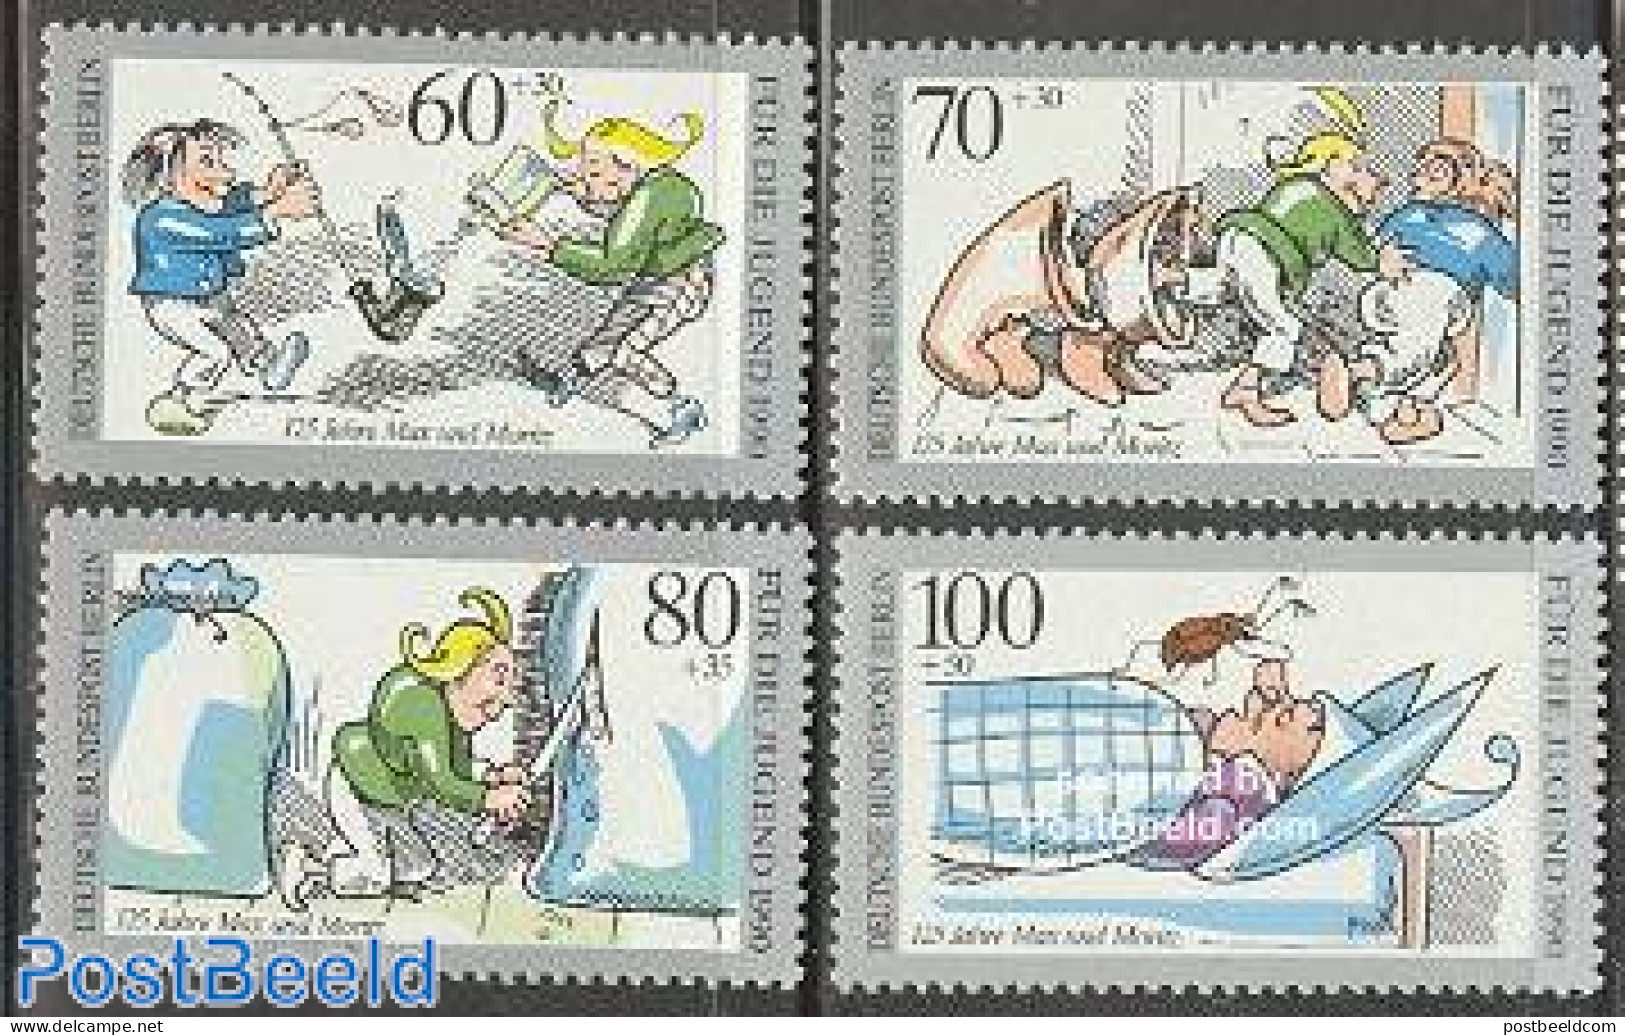 Germany, Berlin 1990 Youth, Max Und Moritz 4v, Mint NH, Art - Books - Children's Books Illustrations - Unused Stamps